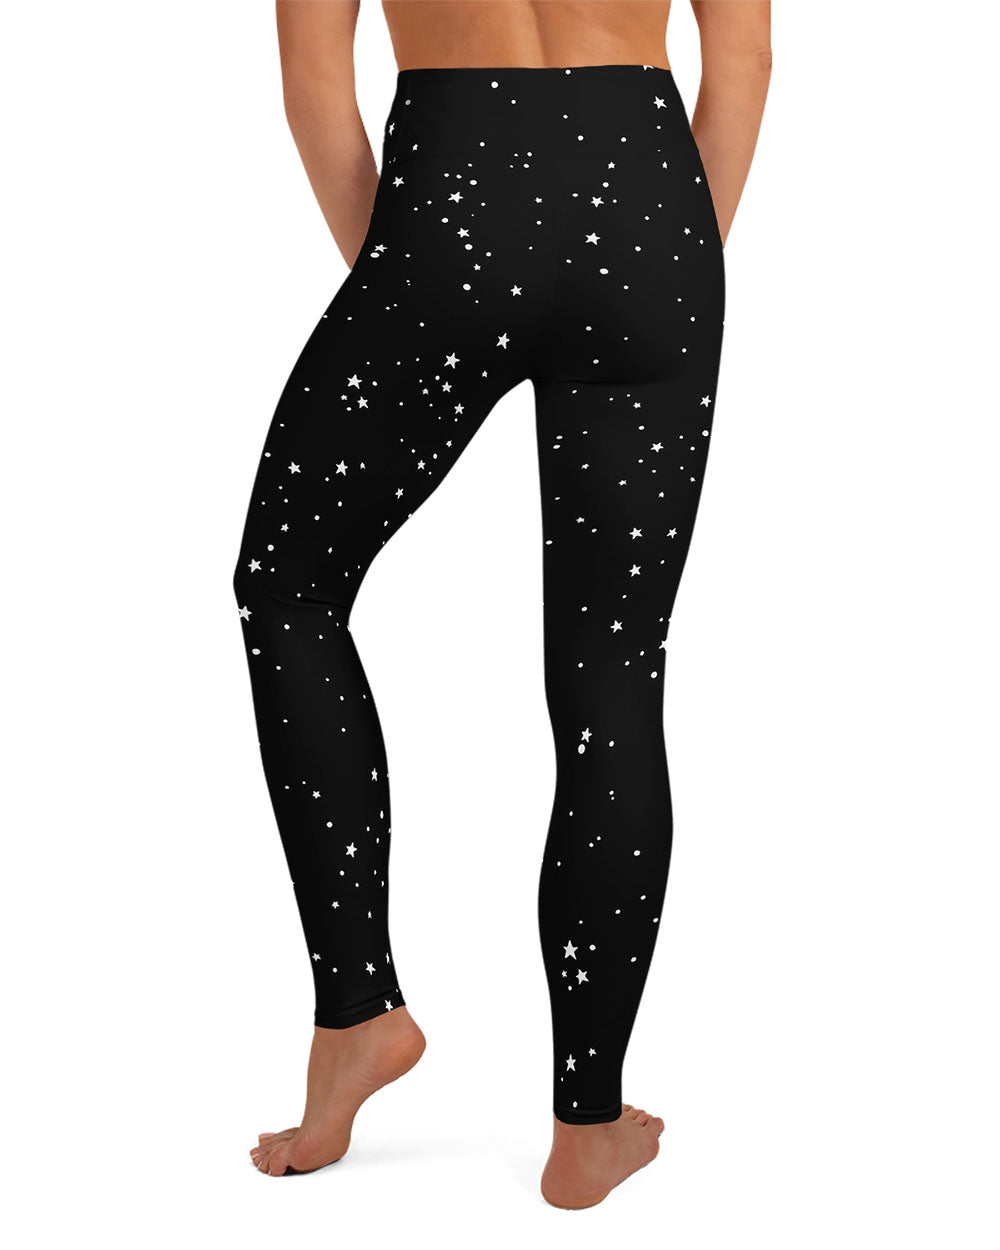 Starry Night Yoga Leggings - UPF 50+ Protection from 98% of harmful rays -  Vegan Witchy Goth Fashion - Dark Academia Occult Gothic Clothing - Eco-friendly Sustainable Grunge Aesthetic Activewear